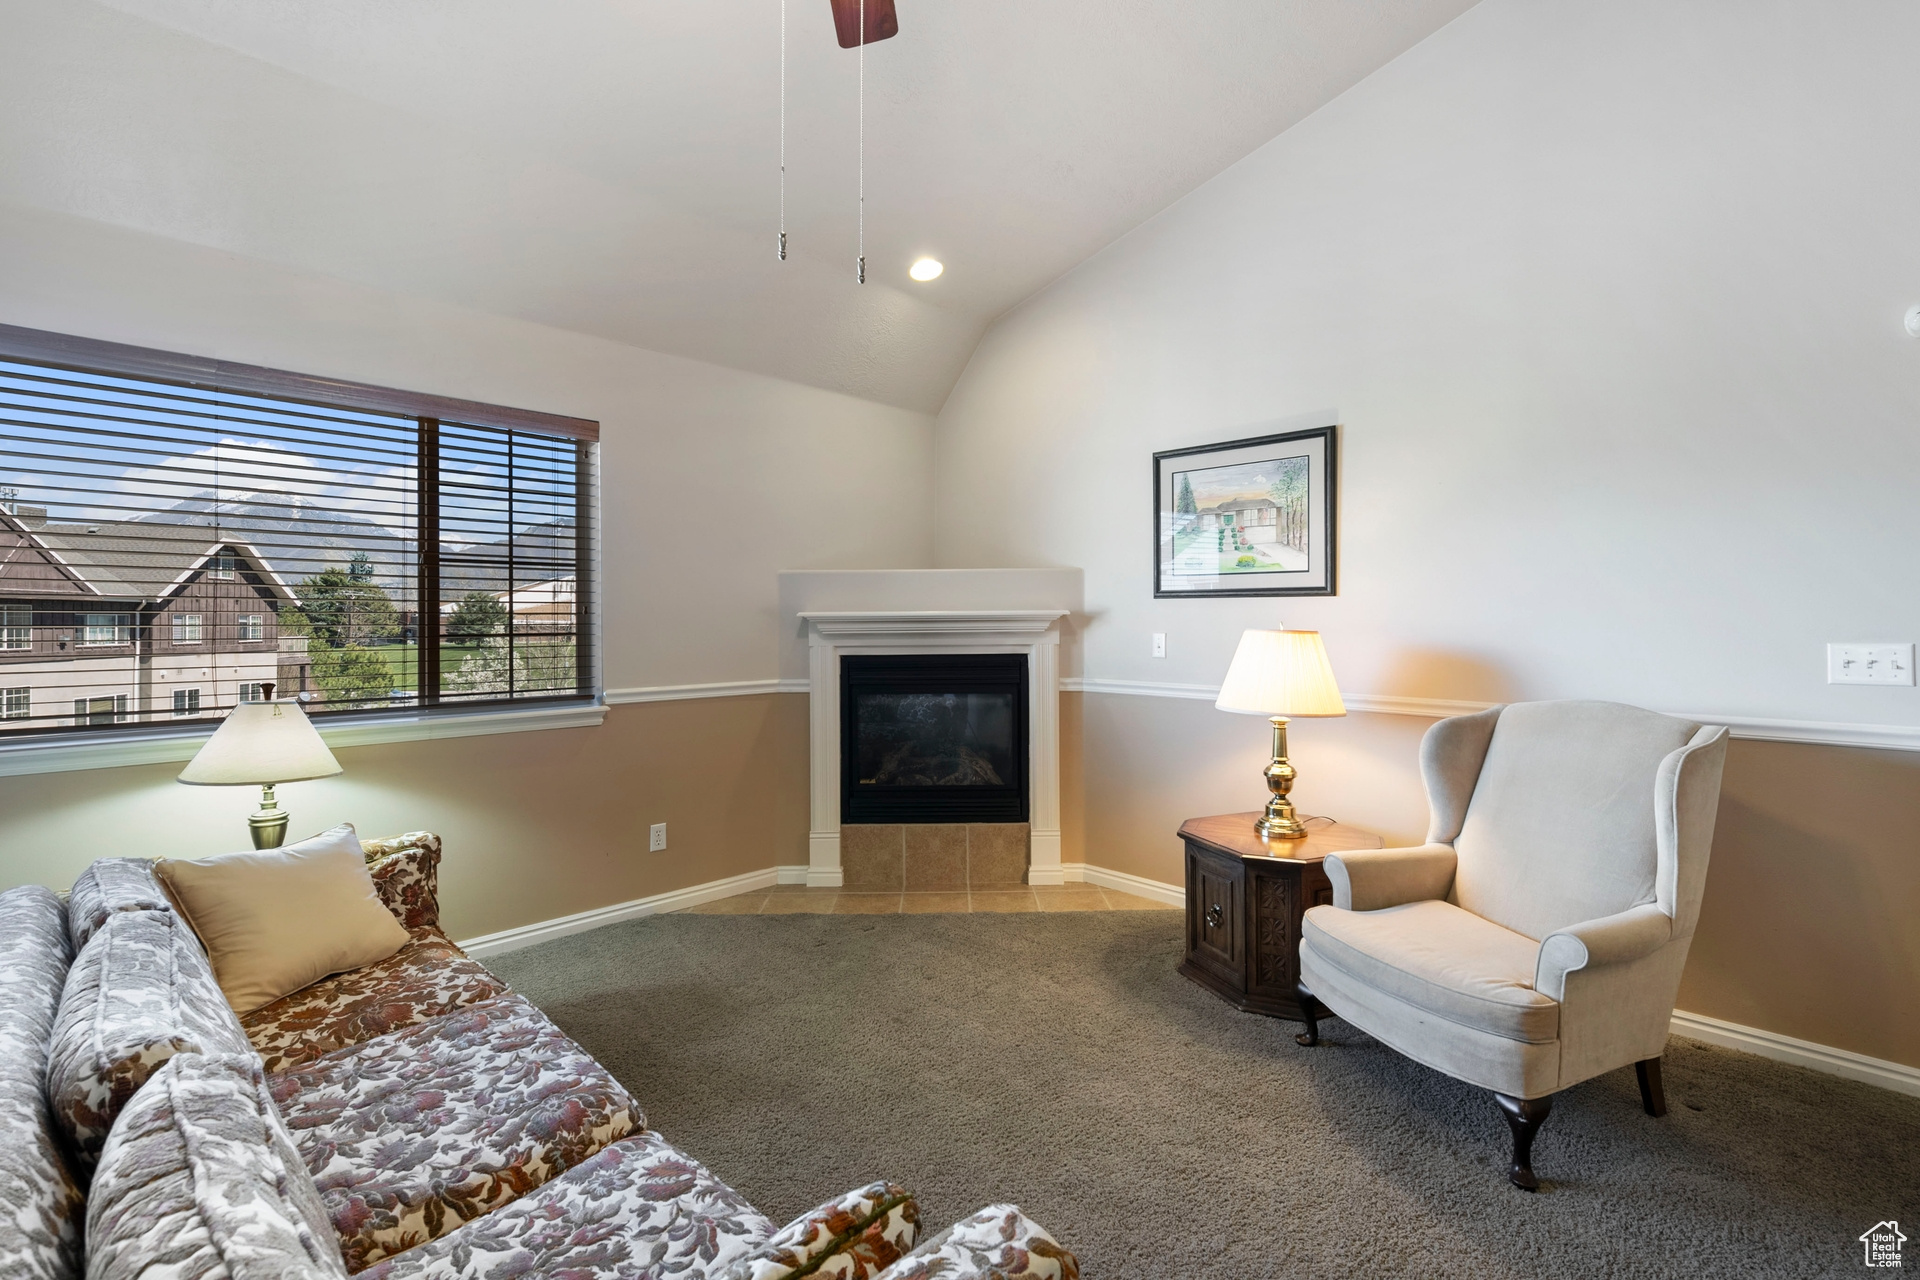 w/ mountain views, gas fireplace and vaulted ceiling